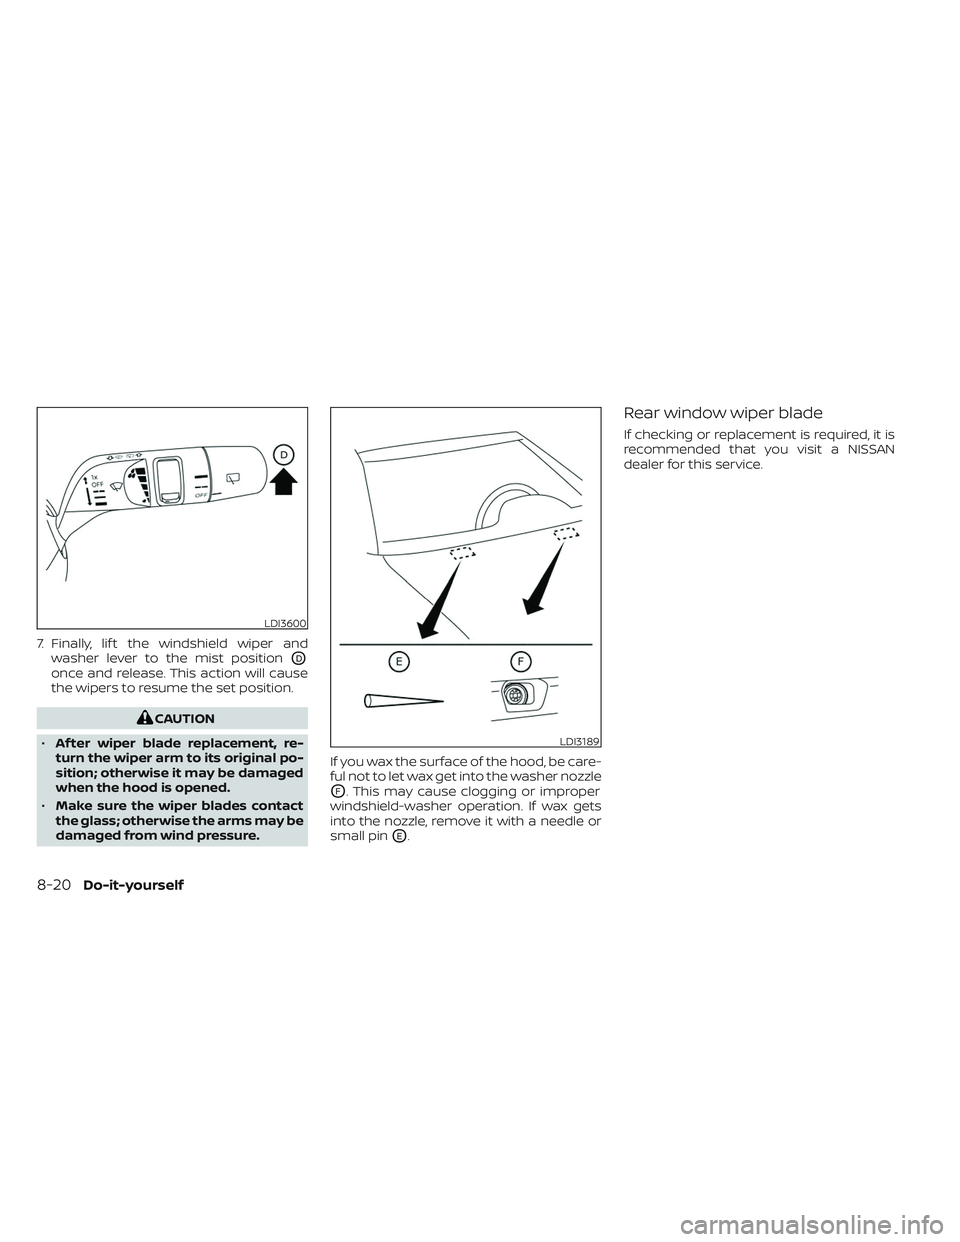 NISSAN PATHFINDER 2022  Owner´s Manual 7. Finally, lif t the windshield wiper andwasher lever to the mist position
OD
once and release. This action will cause
the wipers to resume the set position.
CAUTION
• Af ter wiper blade replacemen